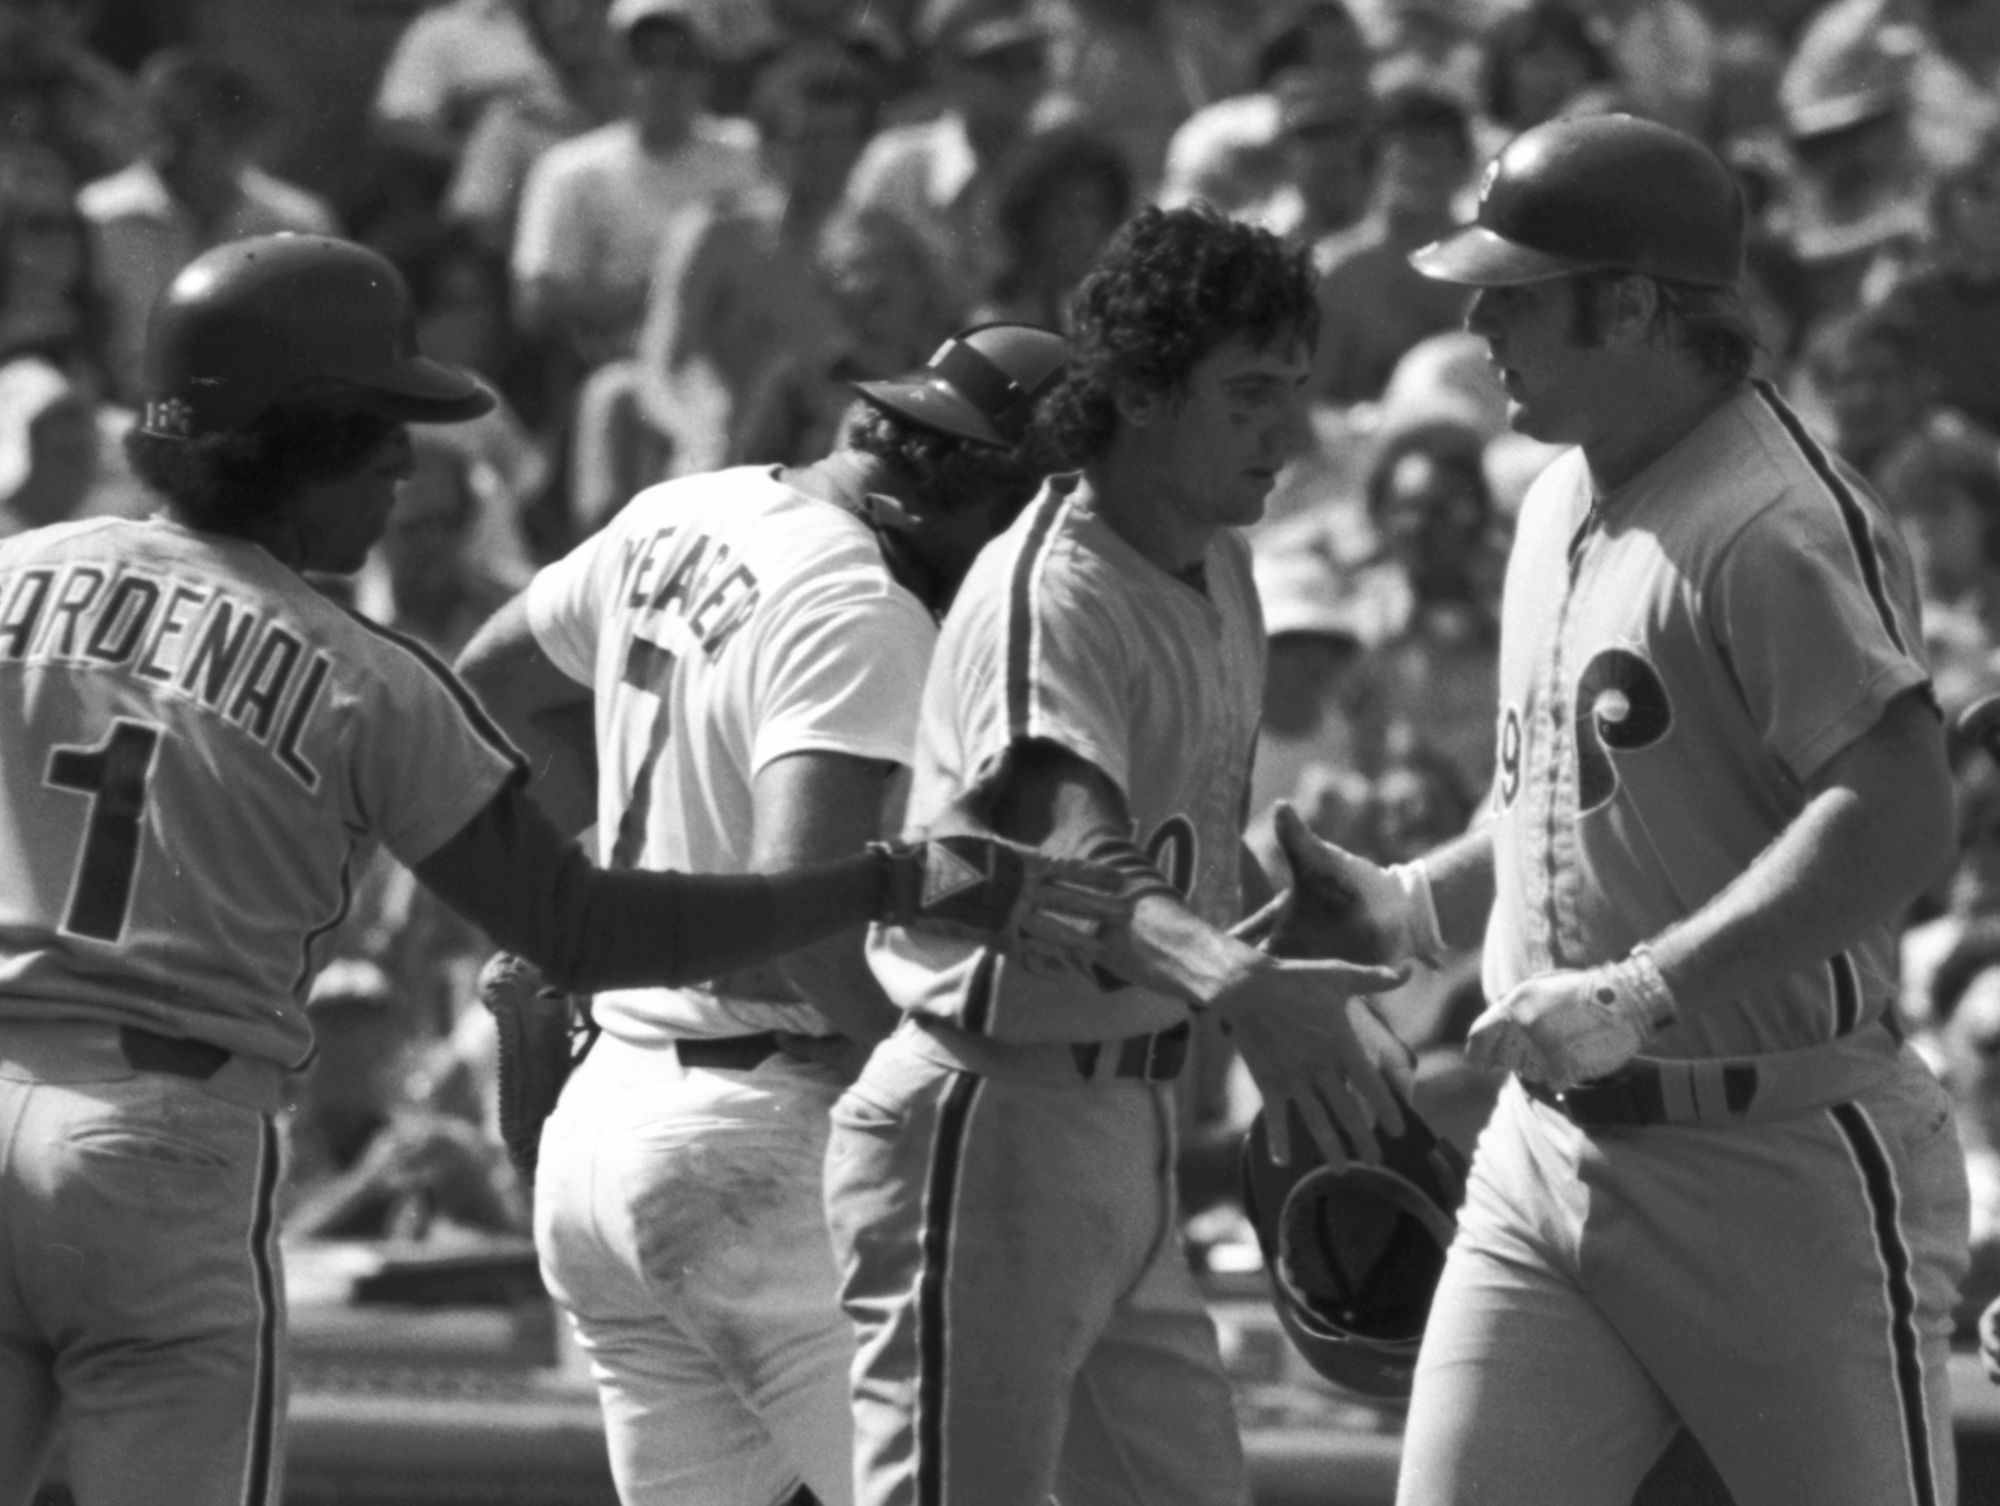 My favorite player: Larry Bowa - The Athletic